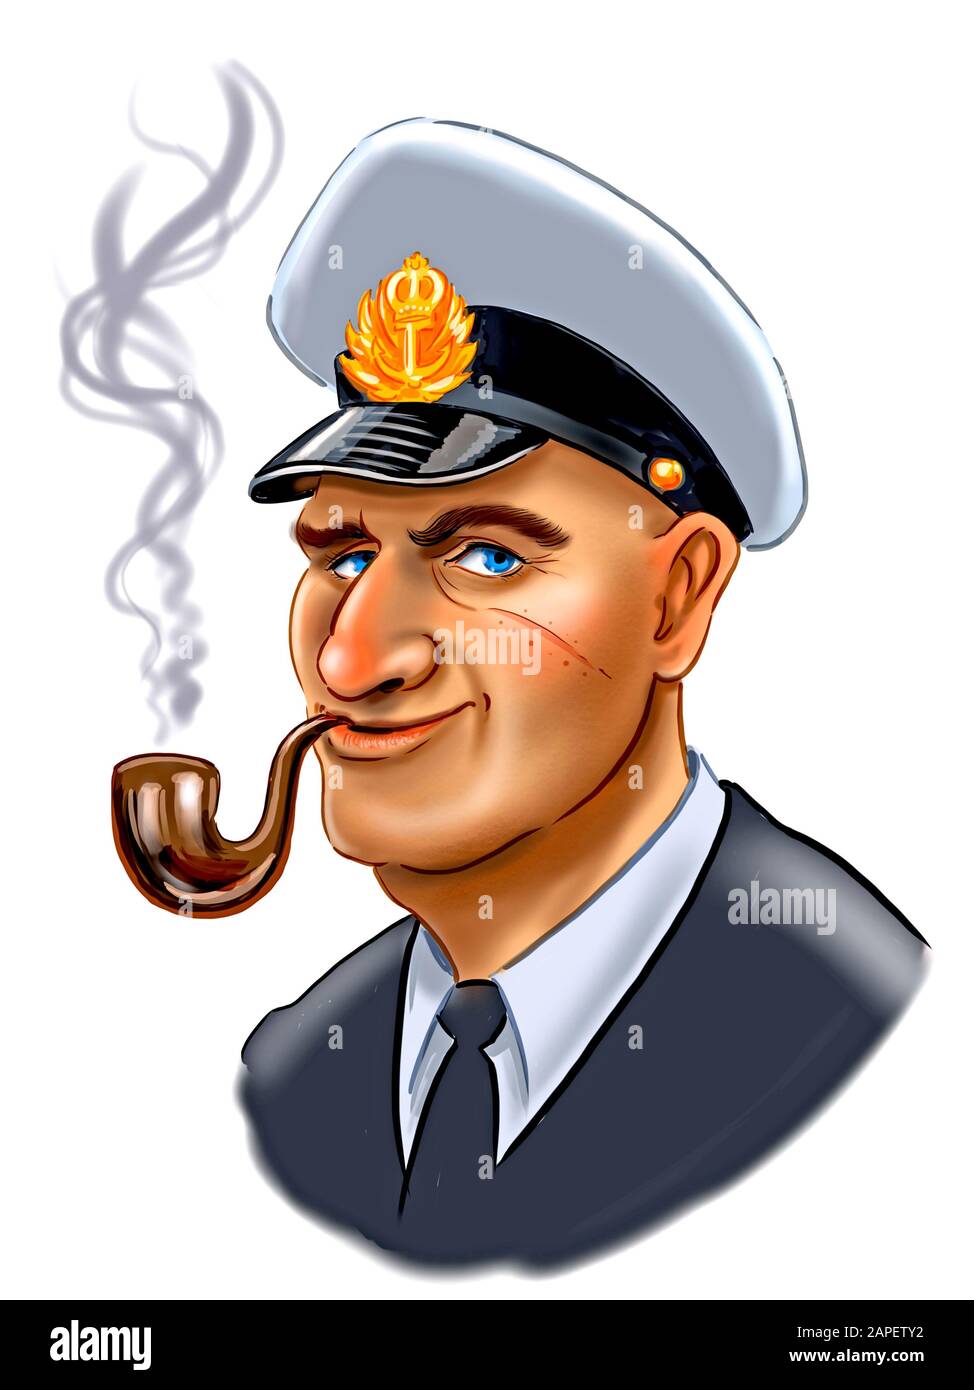 Sea captain with a smoking pipe. Digital illustration Stock Photo